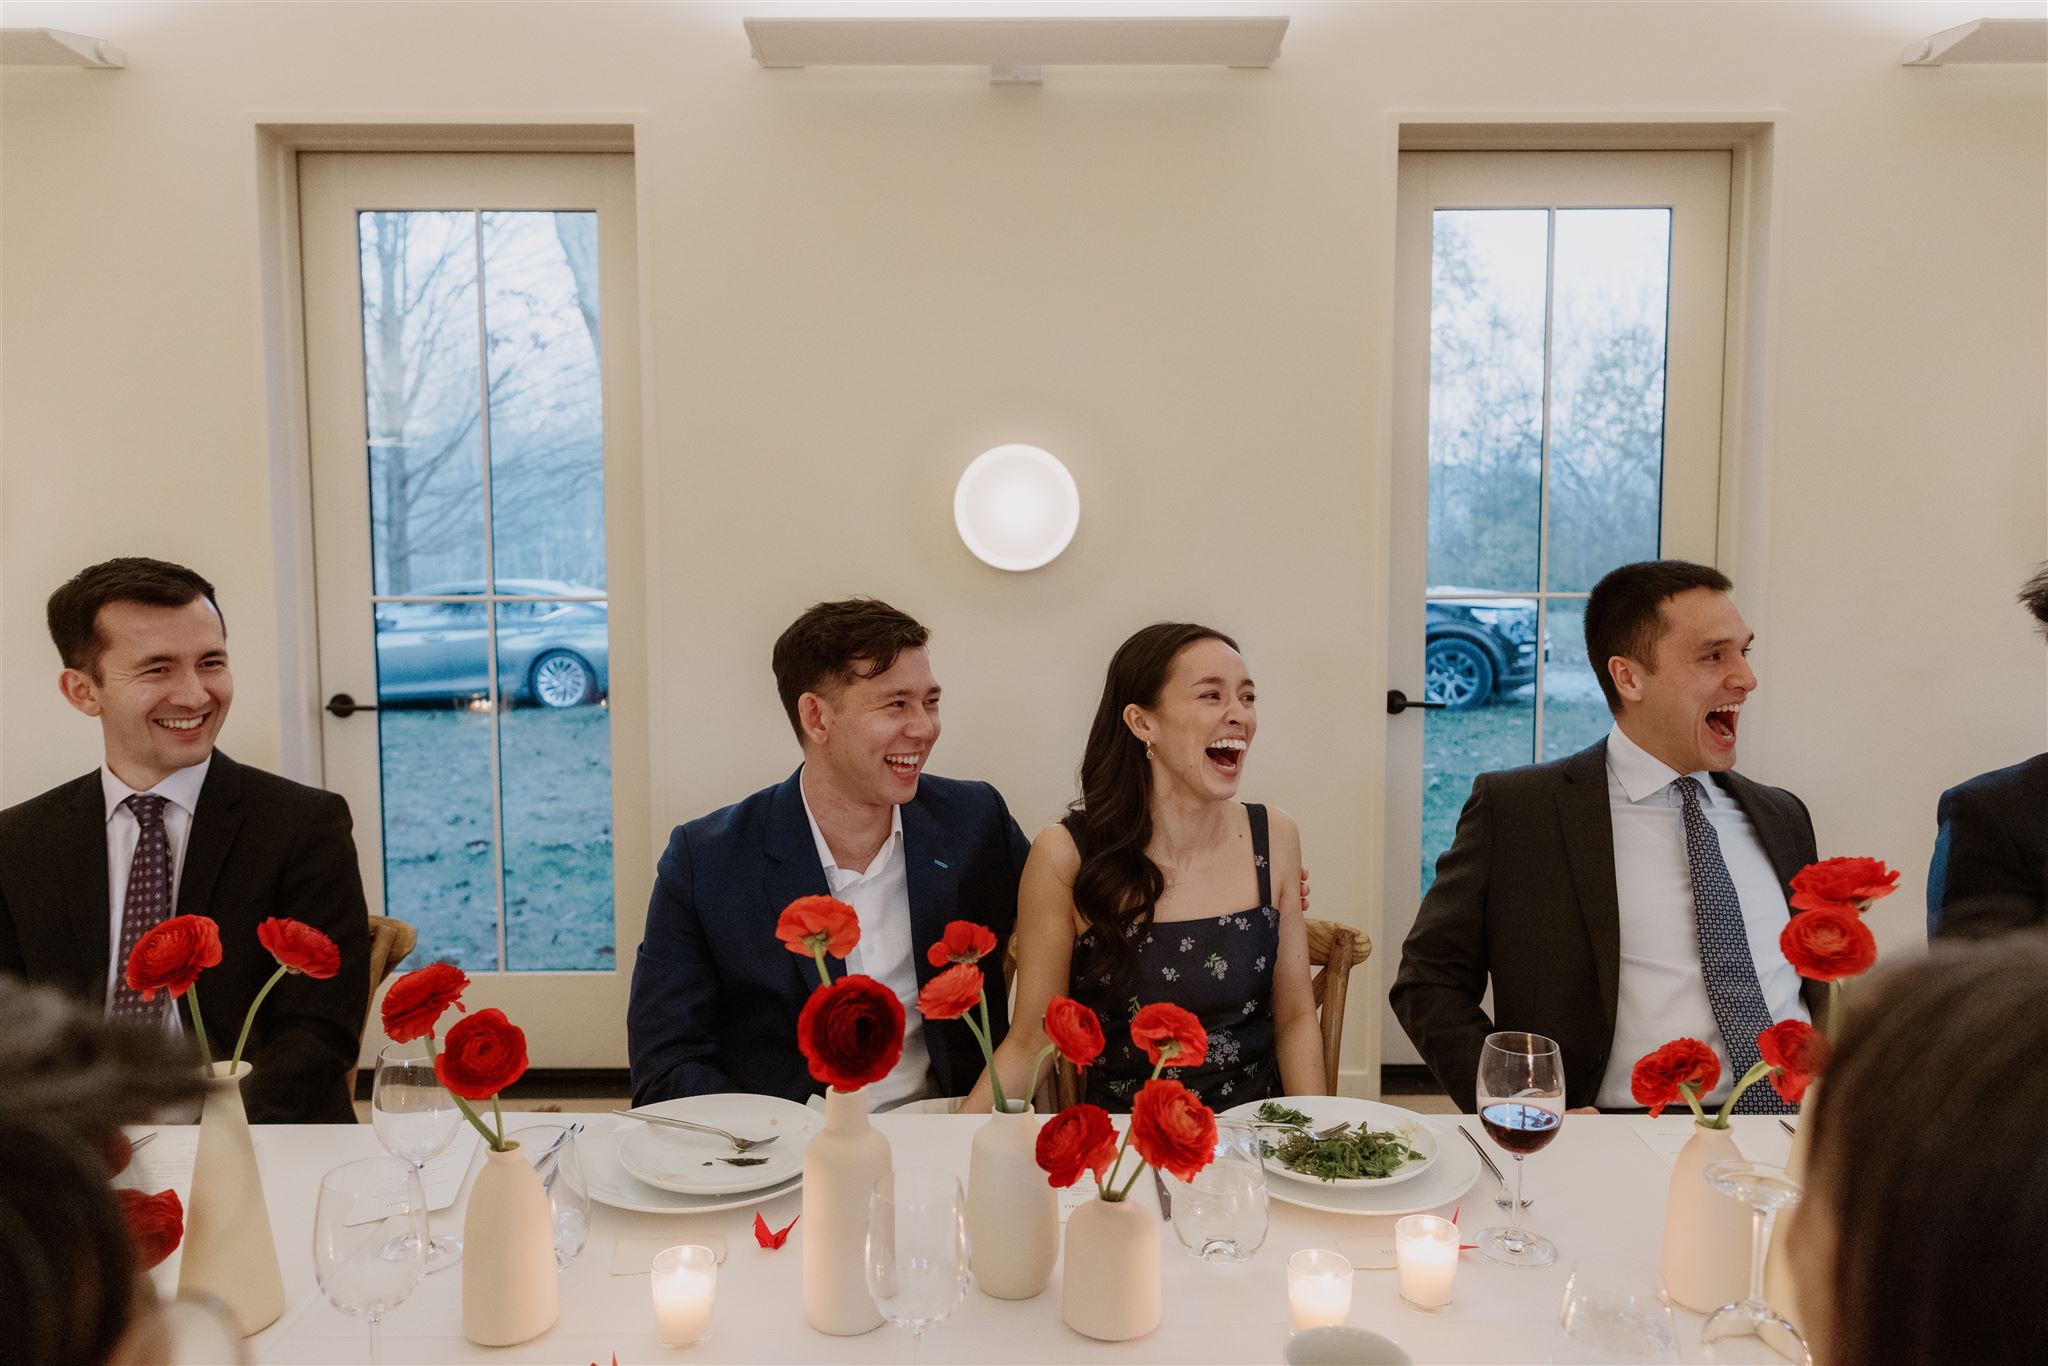 The bride and groom-to-be are heartily laughing with the guests at their welcome dinner. Documentary photography image by Jenny Fu Studio